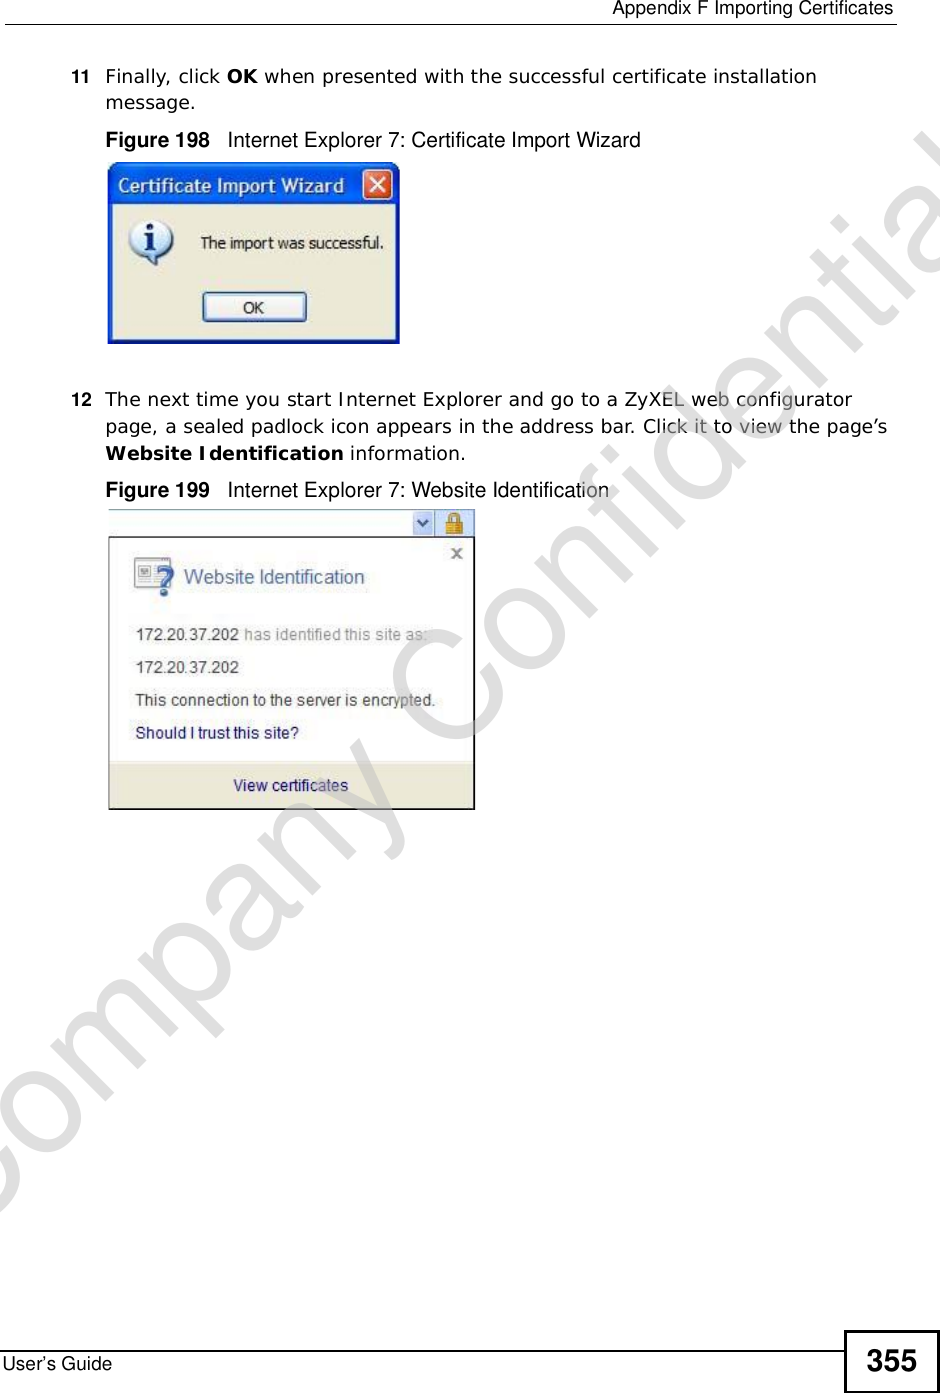  Appendix FImporting CertificatesUser’s Guide 35511 Finally, click OK when presented with the successful certificate installation message.Figure 198   Internet Explorer 7: Certificate Import Wizard12 The next time you start Internet Explorer and go to a ZyXEL web configurator page, a sealed padlock icon appears in the address bar. Click it to view the page’s Website Identification information.Figure 199   Internet Explorer 7: Website IdentificationCompany Confidential